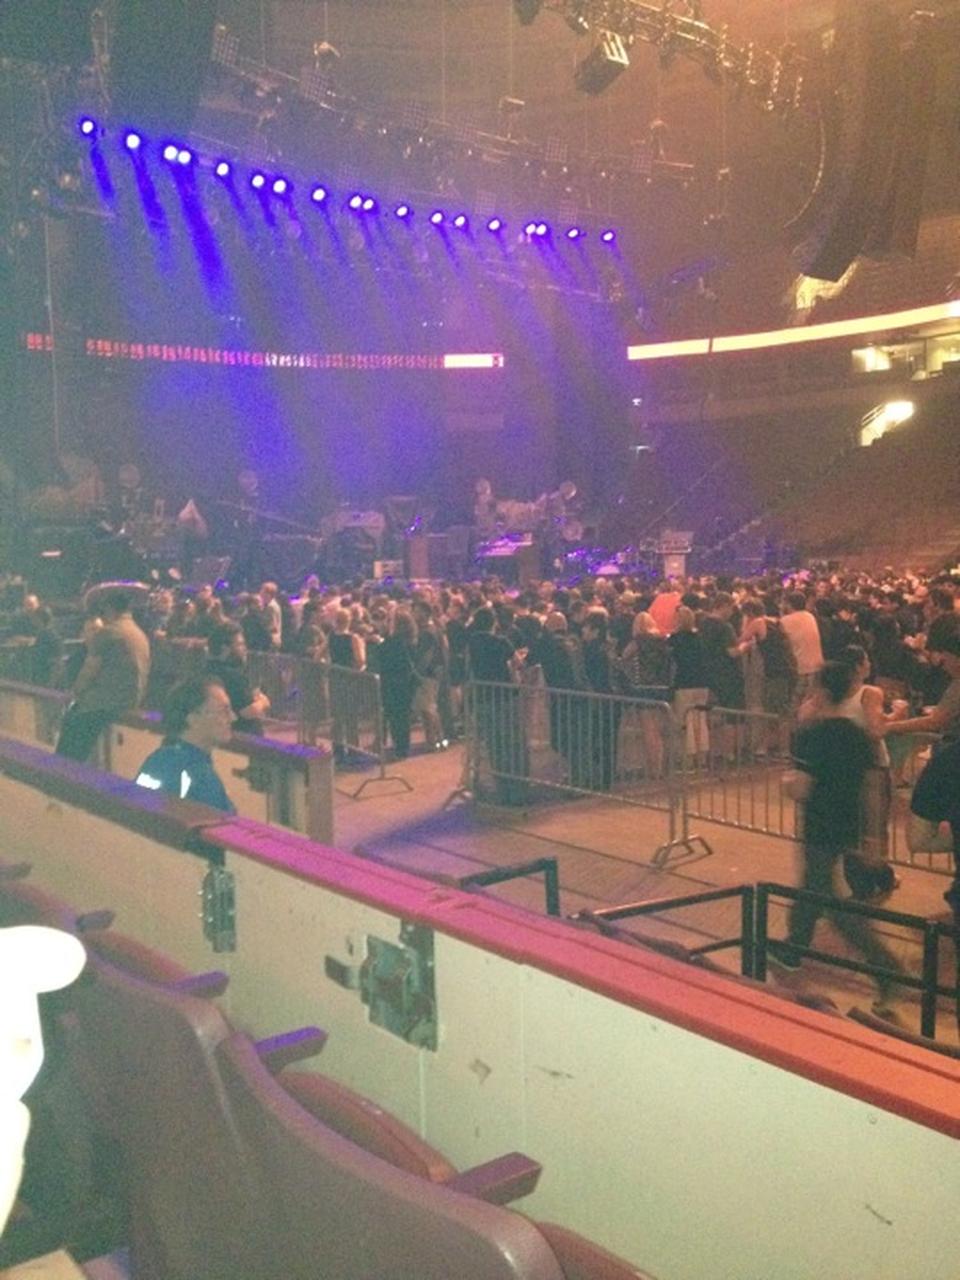 section 116, row 2 seat view  for concert - rogers arena